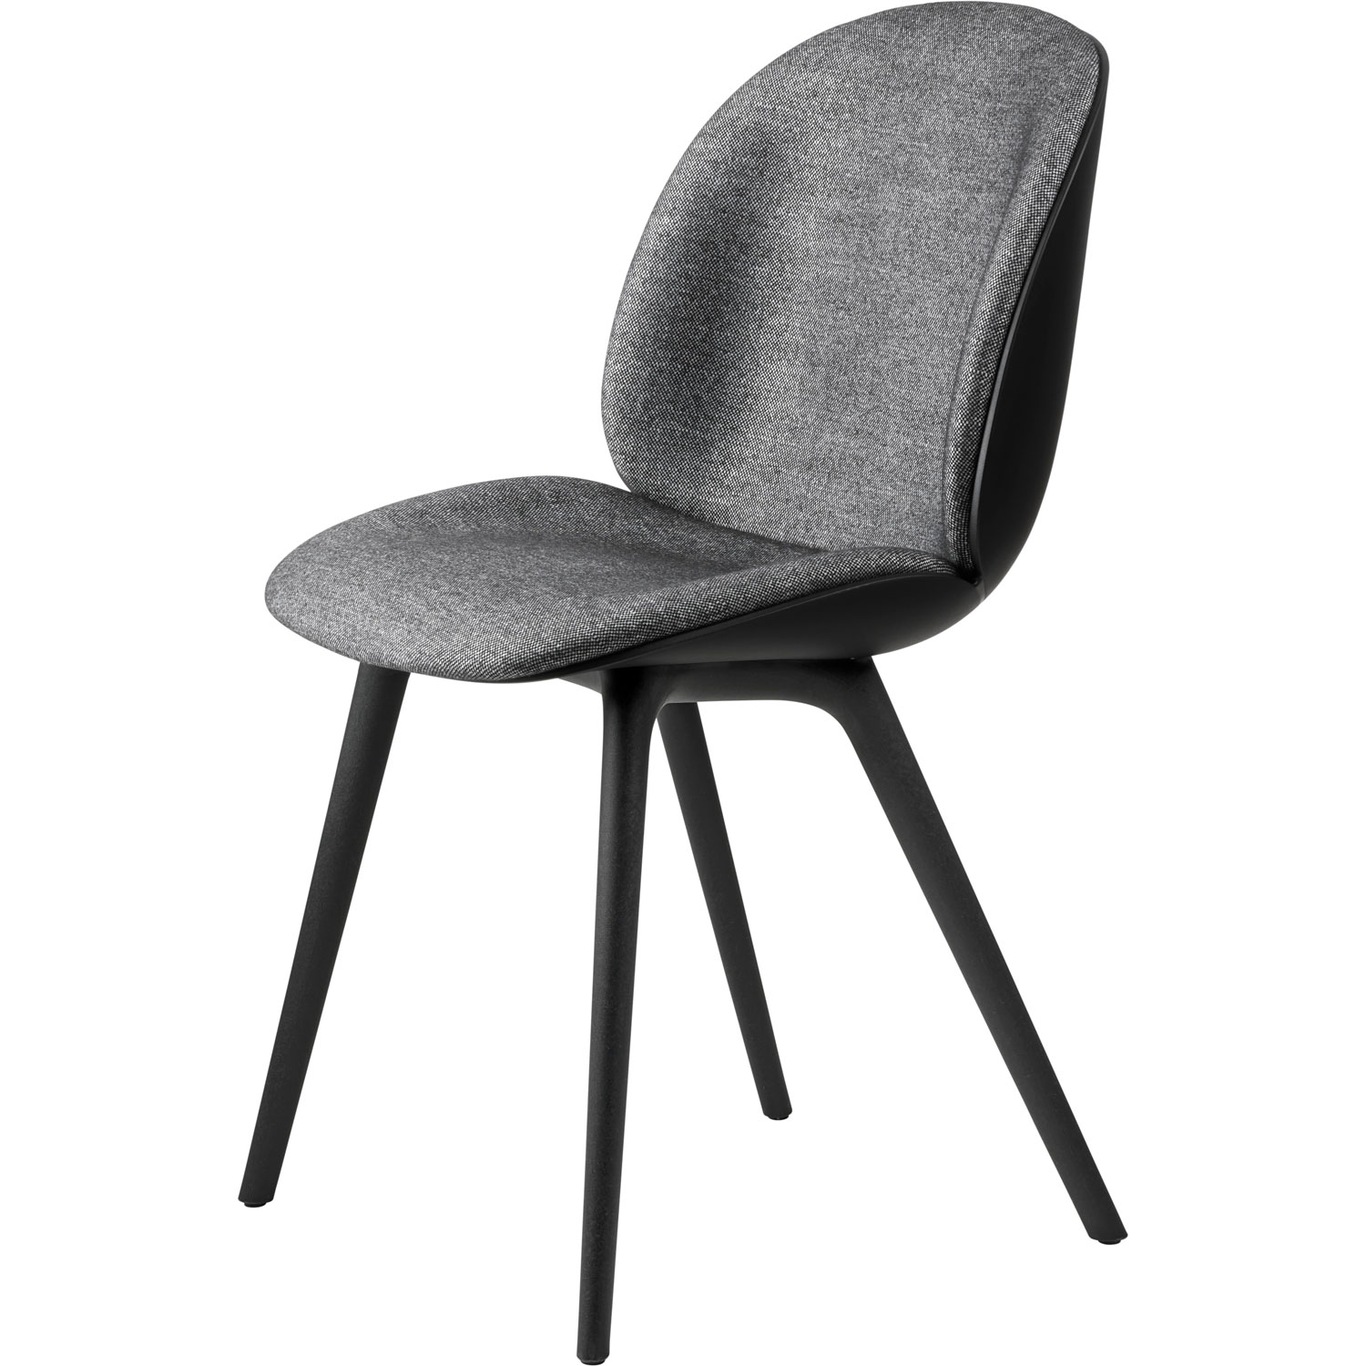 Beetle Chair Upholstered Front / Plastic Base, Plain 0023